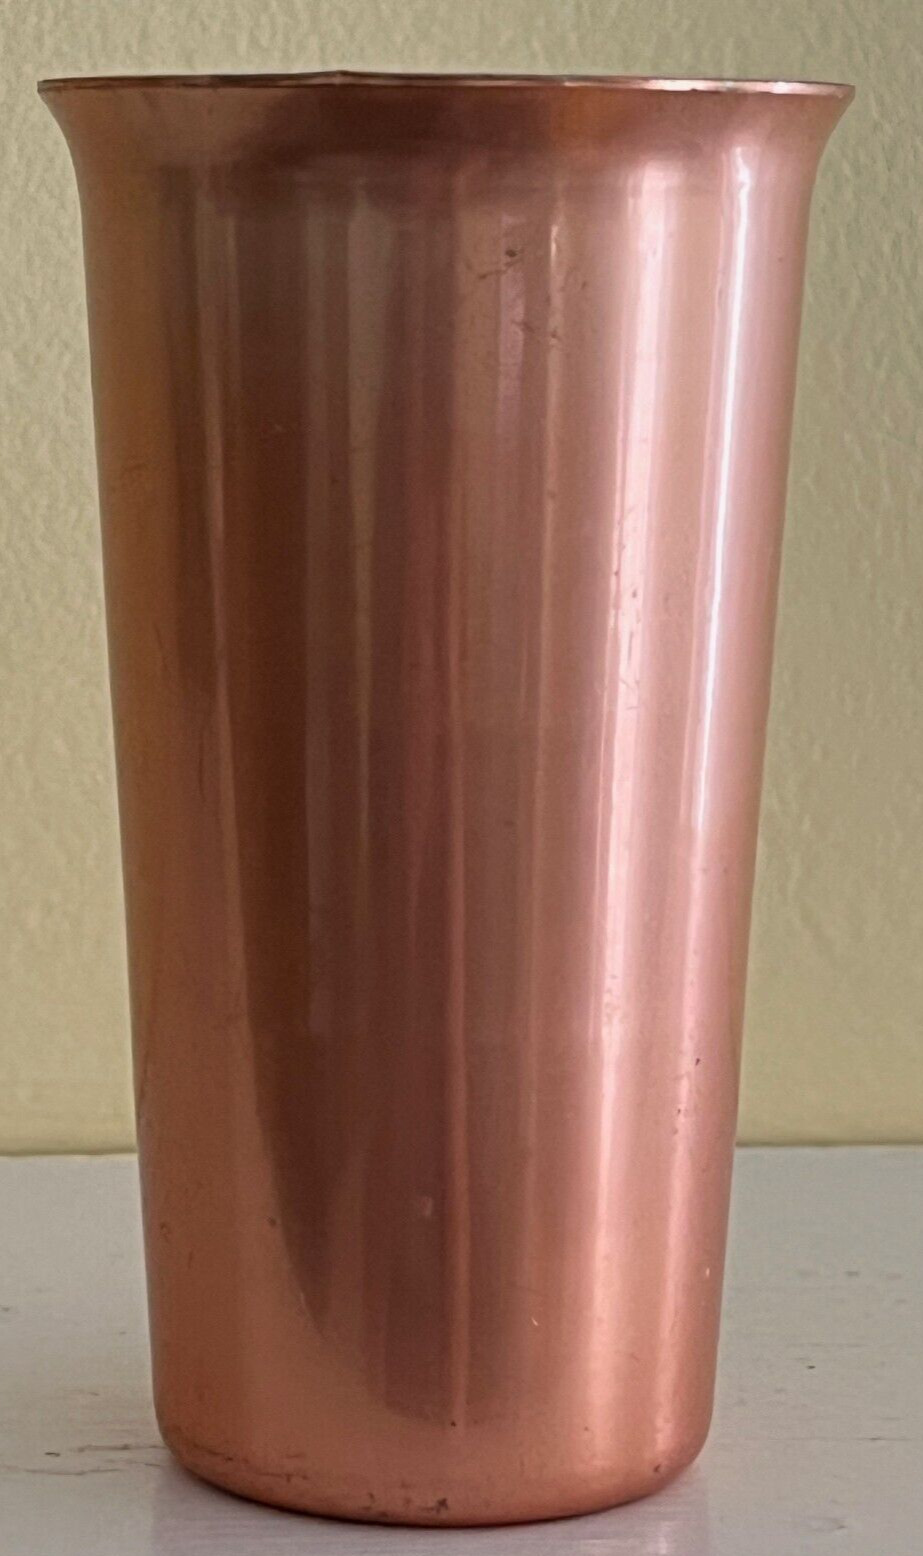 Vintage Mid Century Modern Anodized Aluminum Cup, Pink